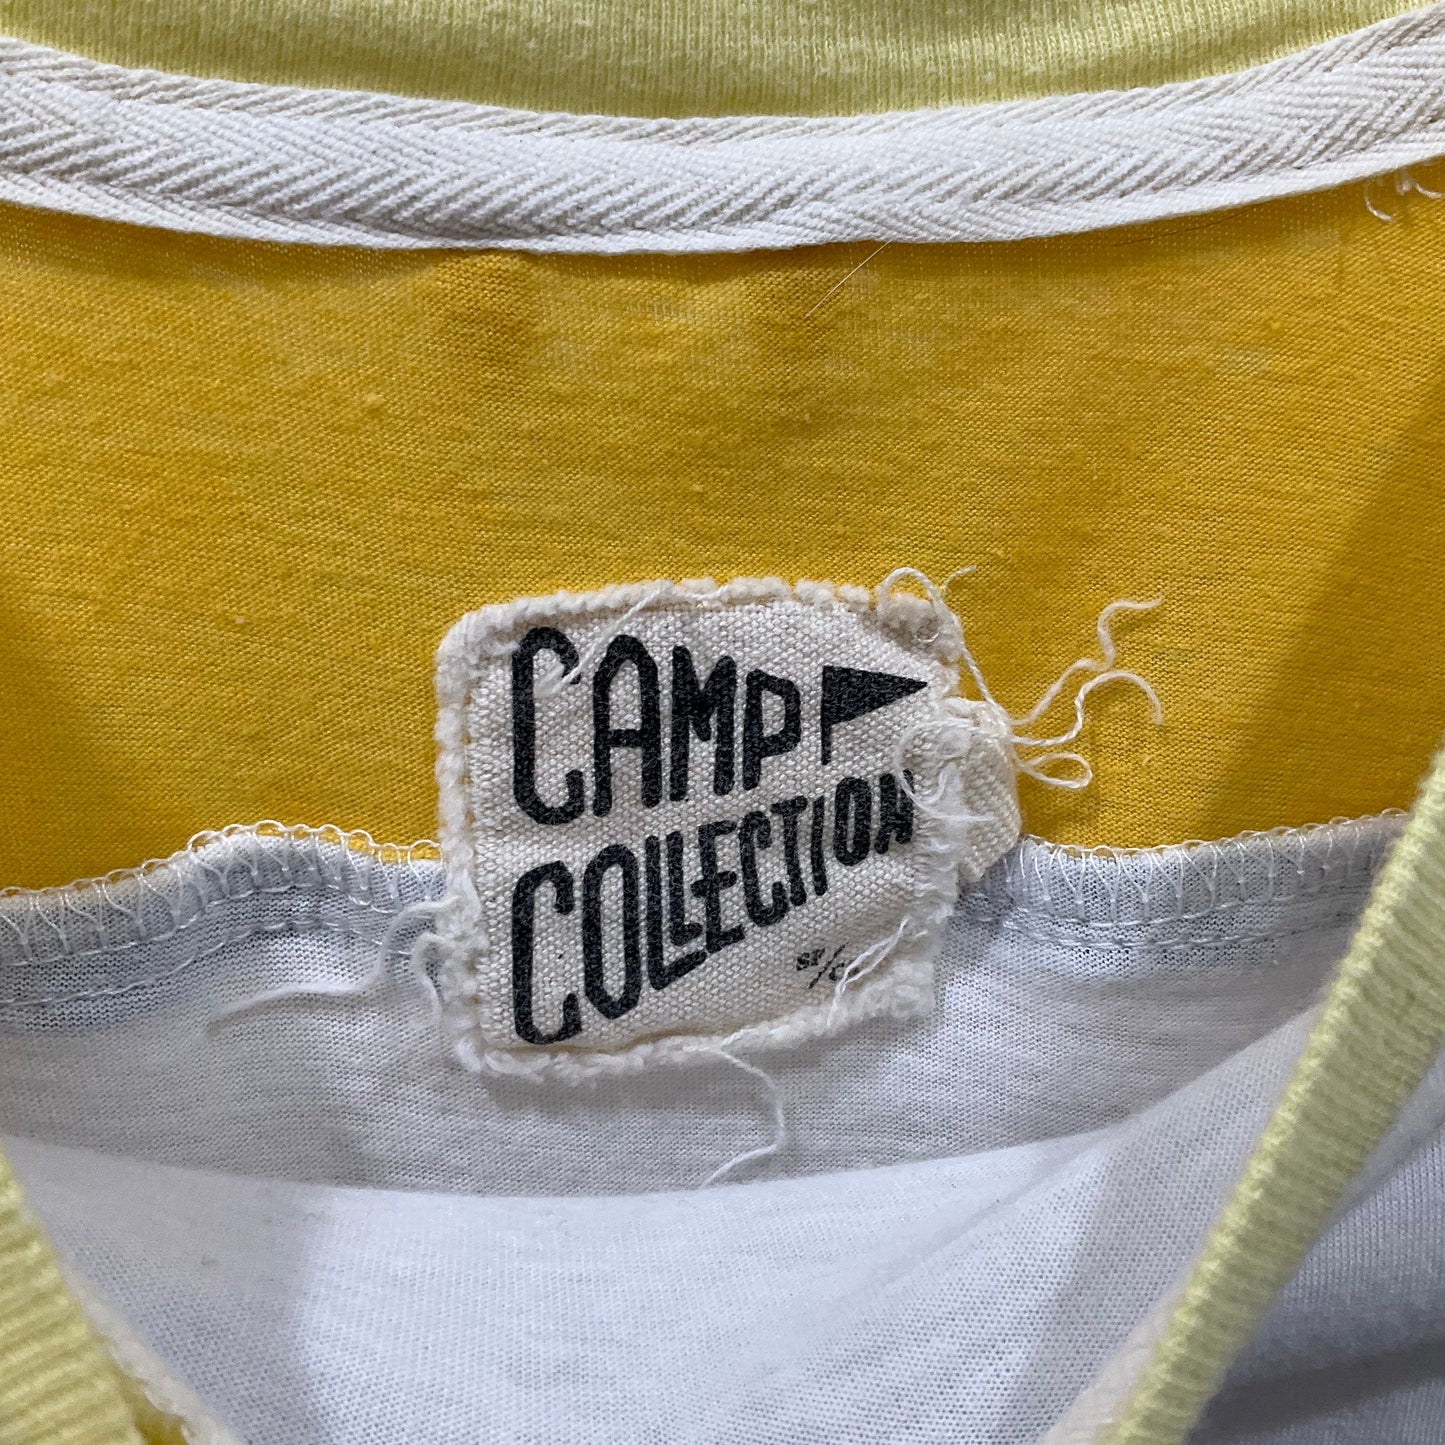 Yellow Top Short Sleeve camp collection, Size S